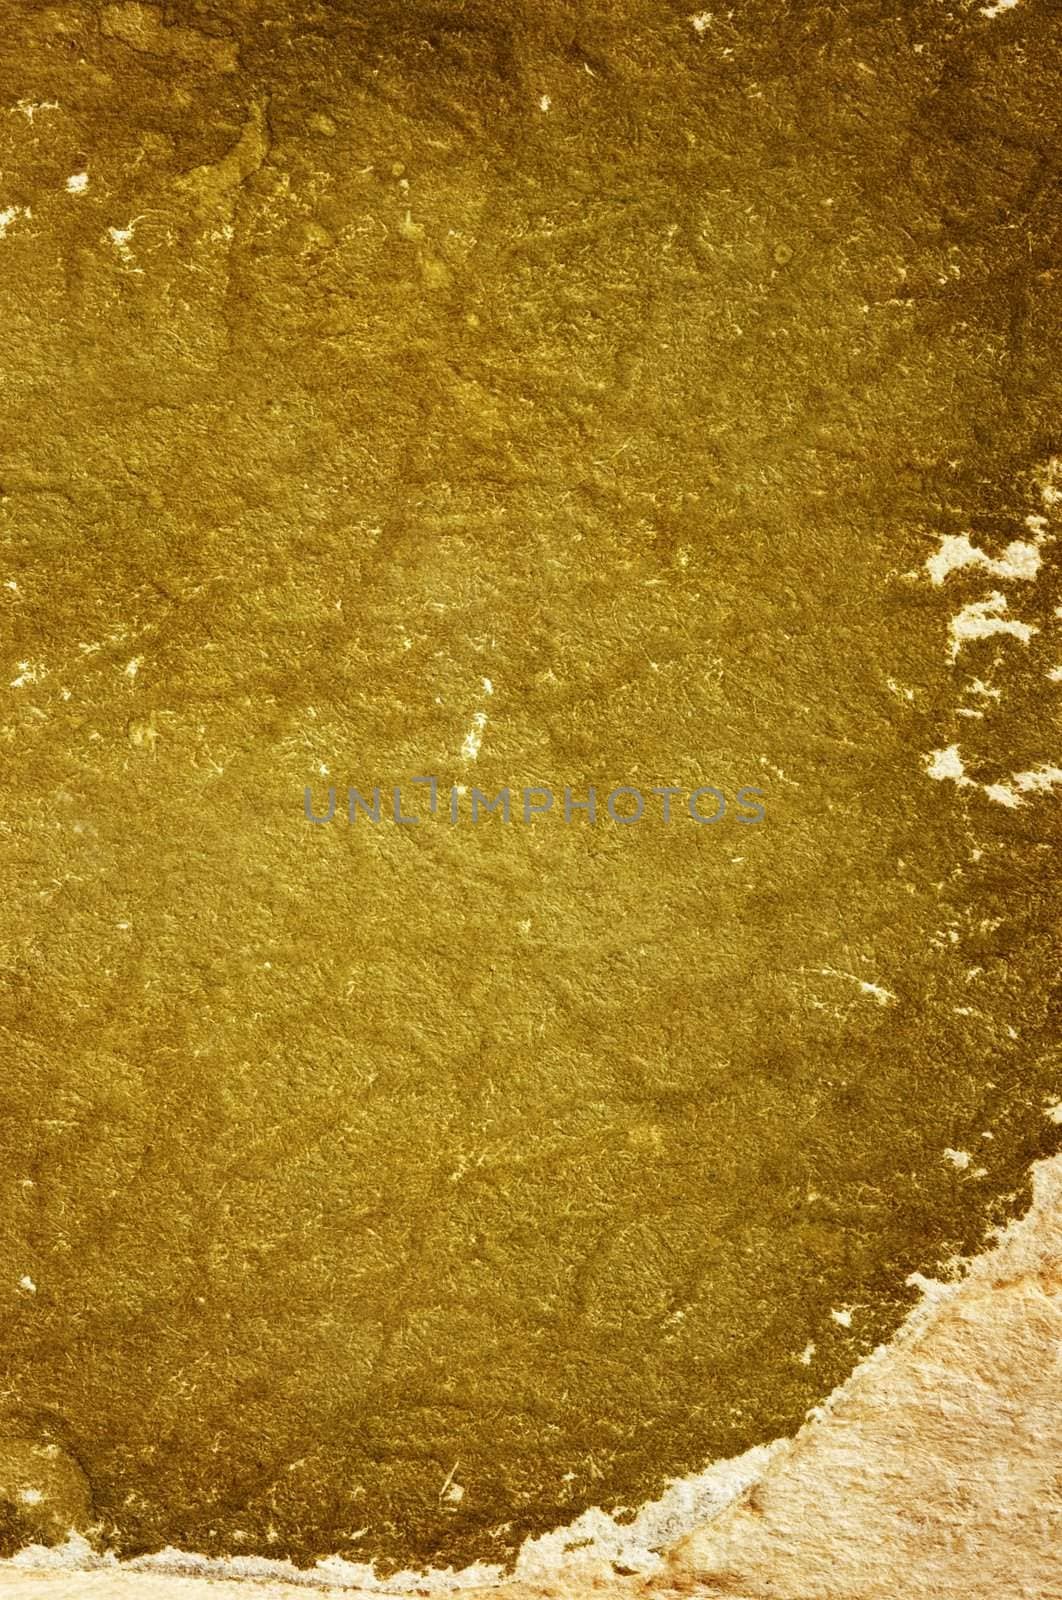 grunge texture for your design and art work,focus point on the center of the image